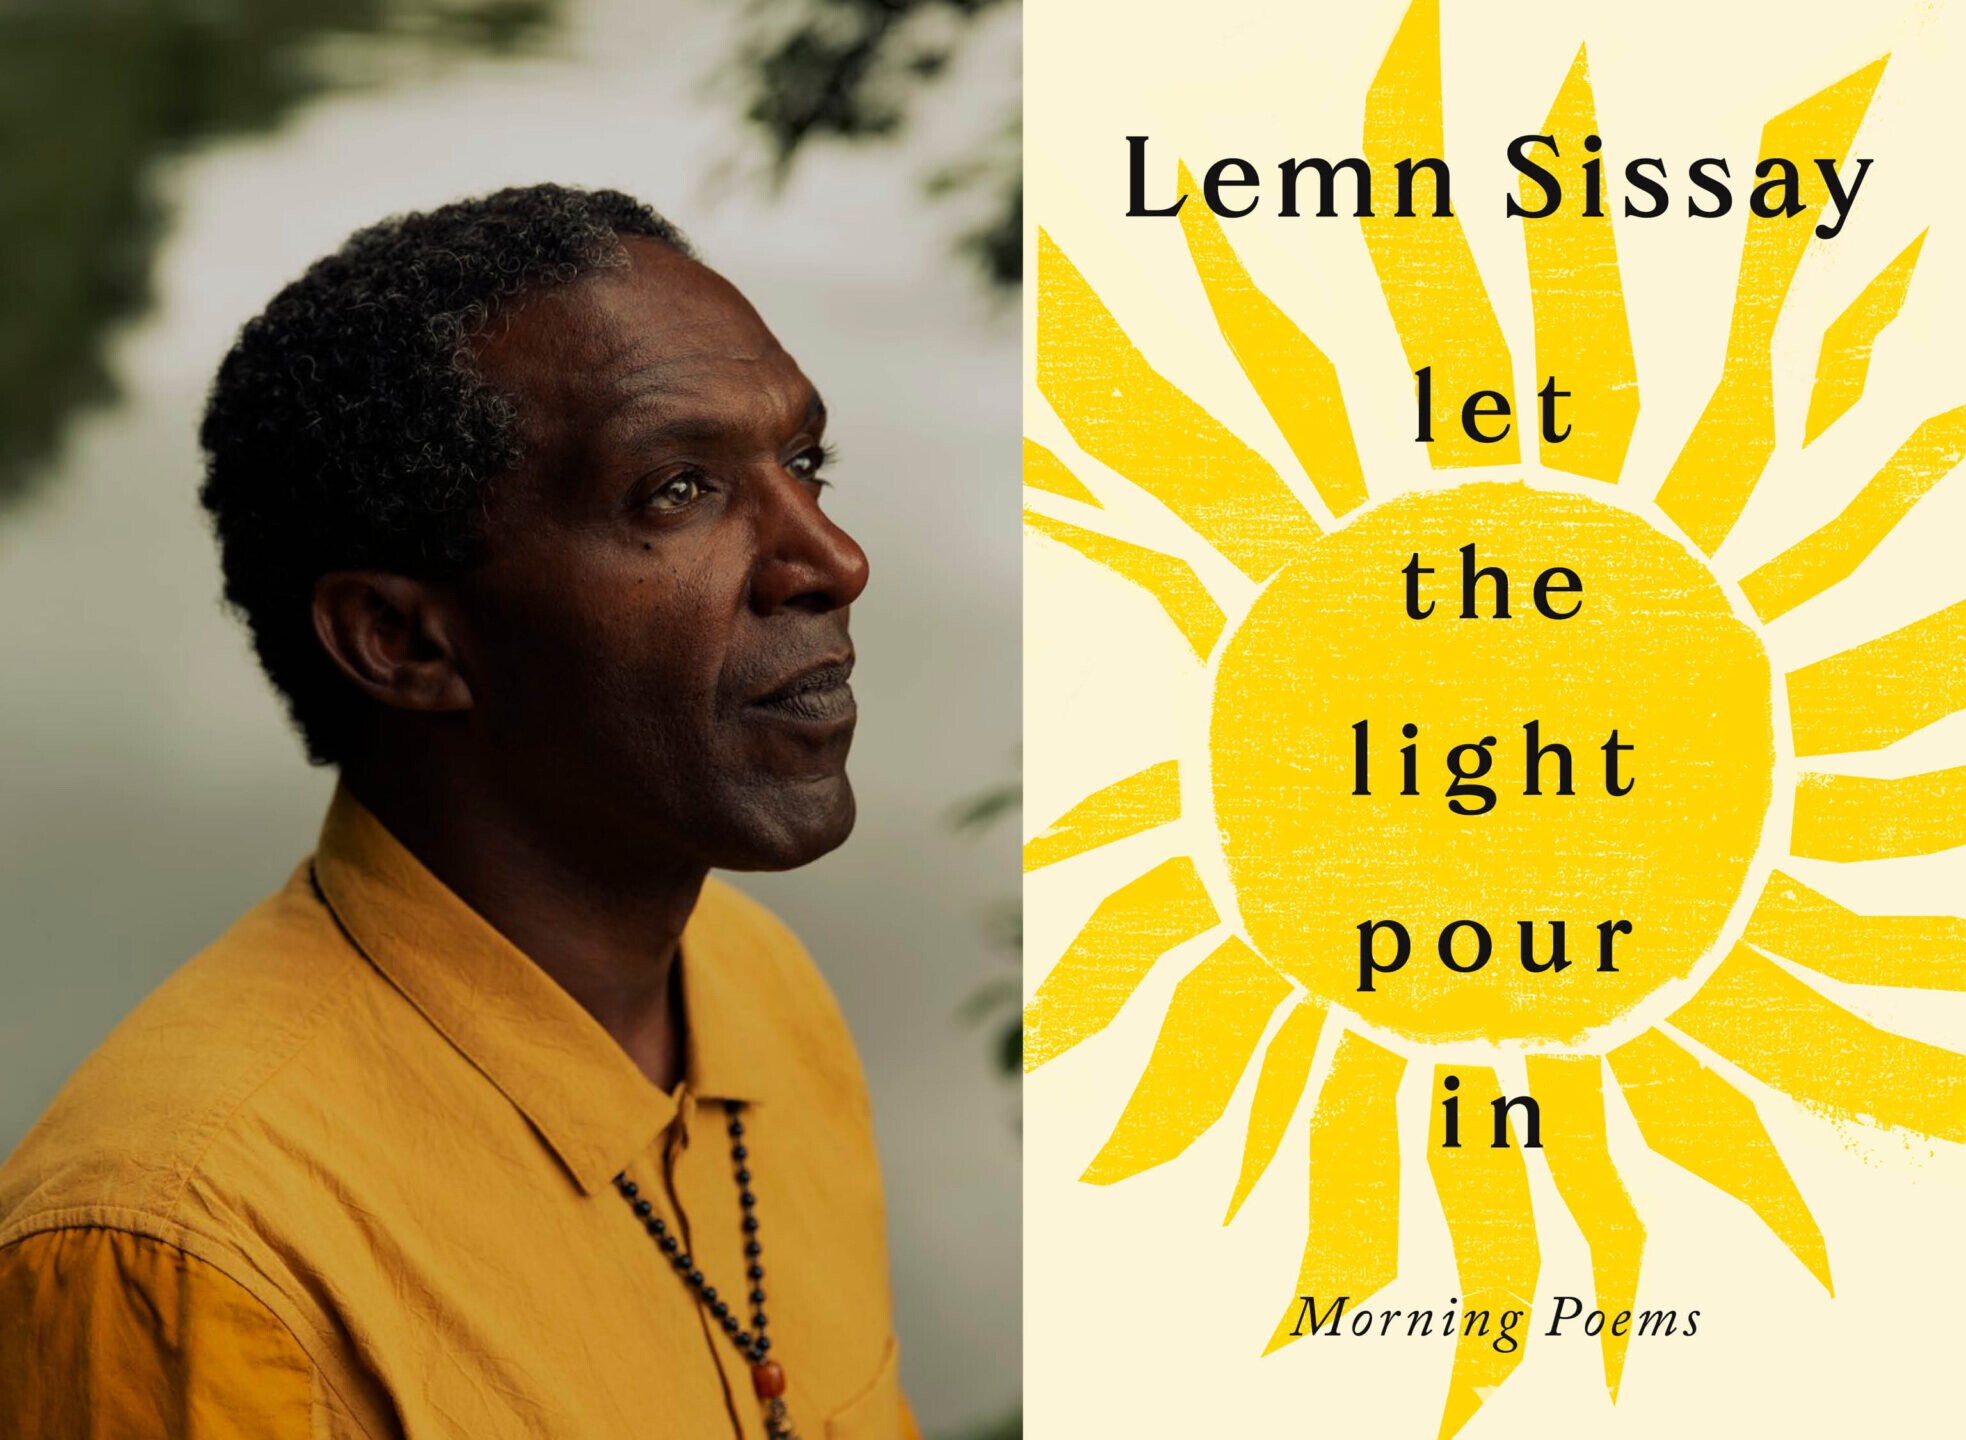 Image name Lemn Sissay Let the light pour in 1 the 3 image from the post Events in Yorkshire.com.